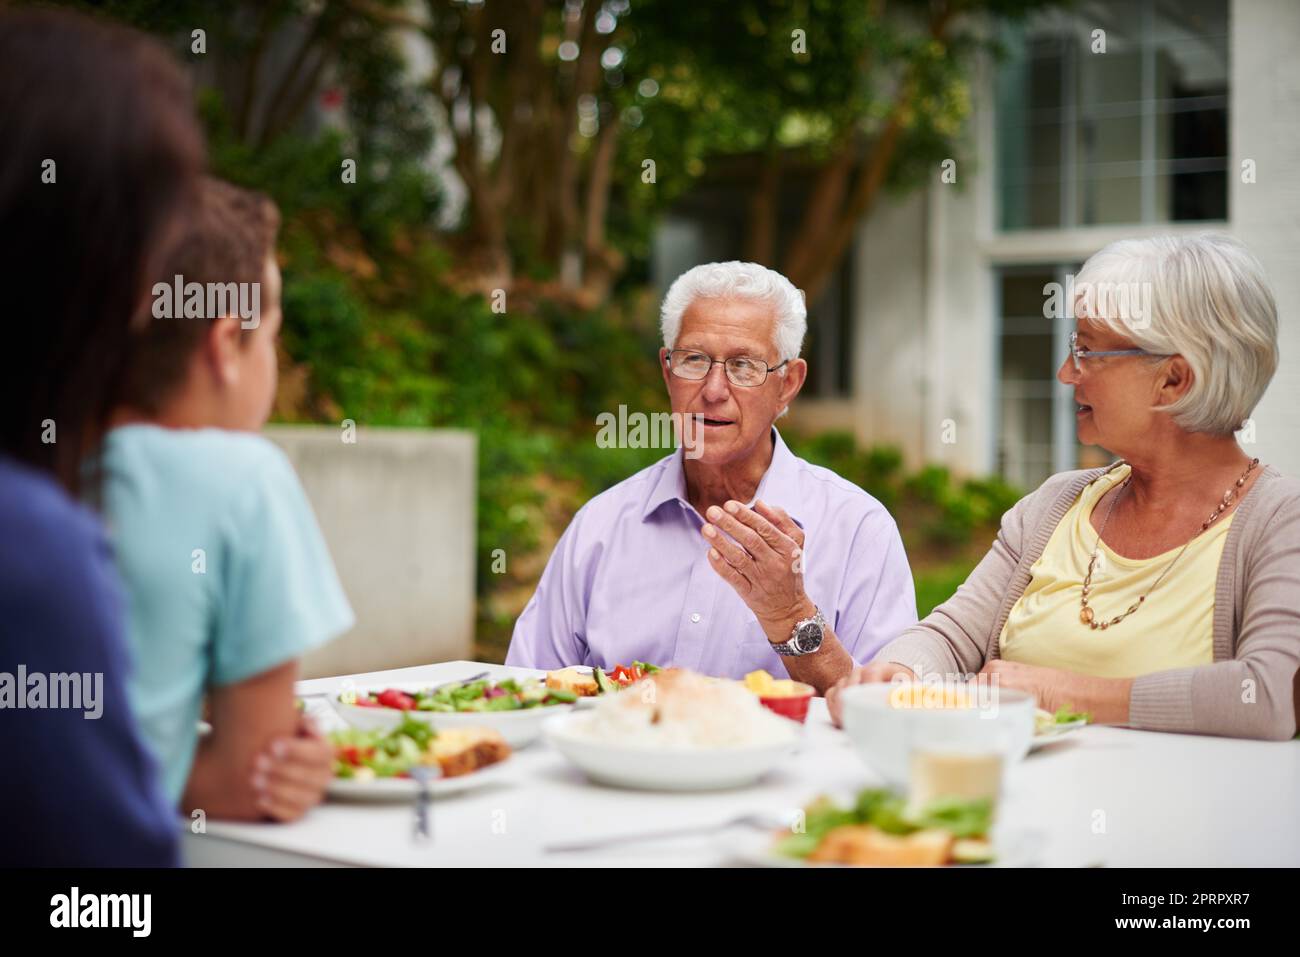 Passing on wisdom. a happy multi-generational family having a meal together outside. Stock Photo